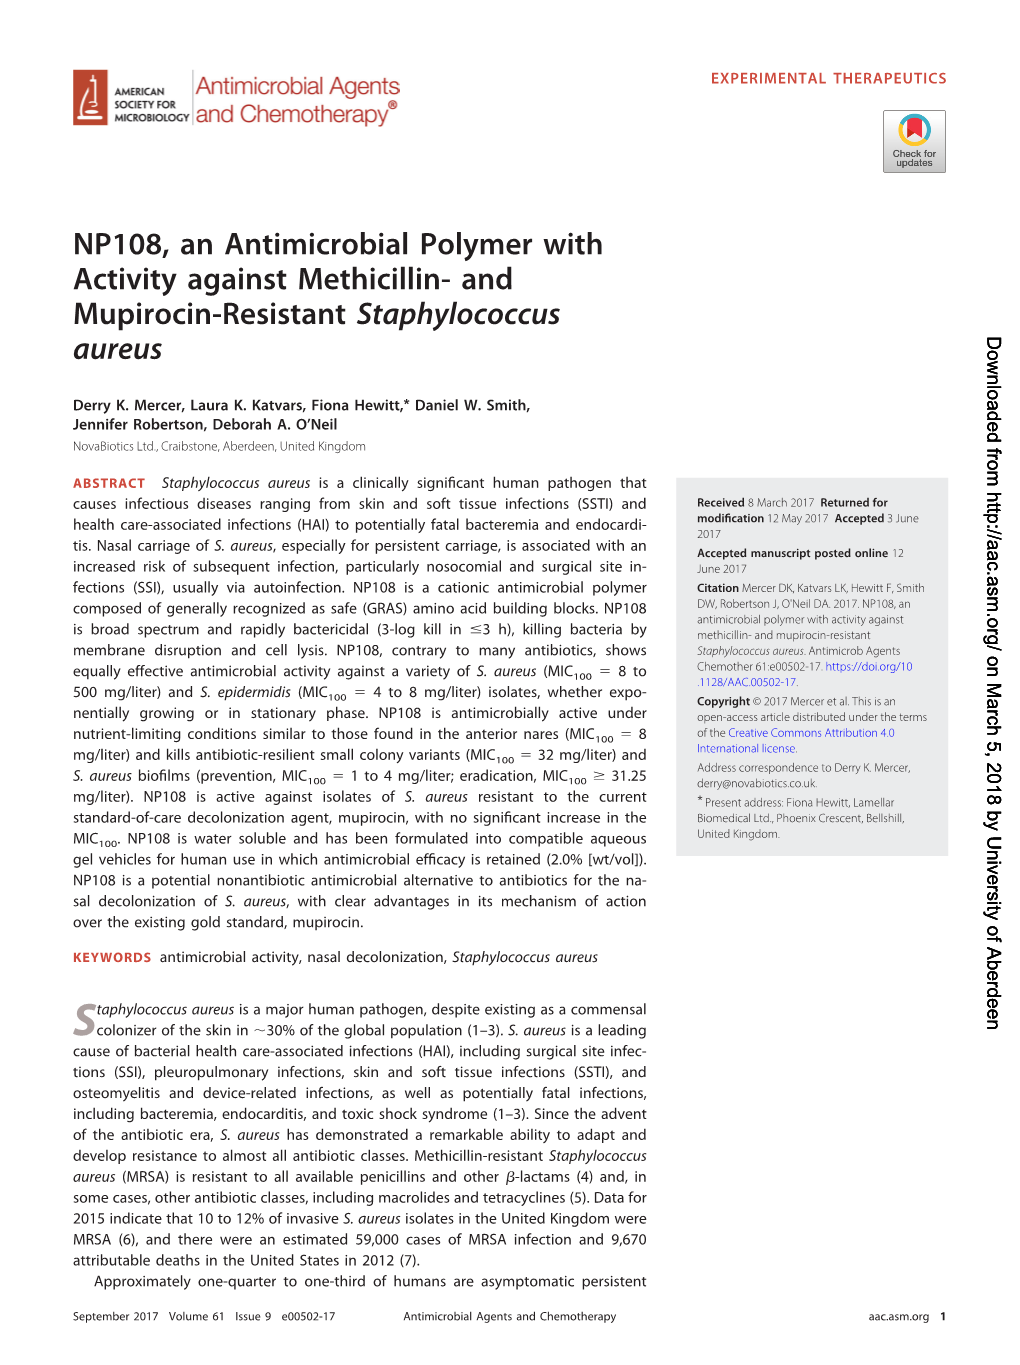 NP108, an Antimicrobial Polymer with Activity Against Methicillin- and Mupirocin-Resistant Staphylococcus Aureus Downloaded From